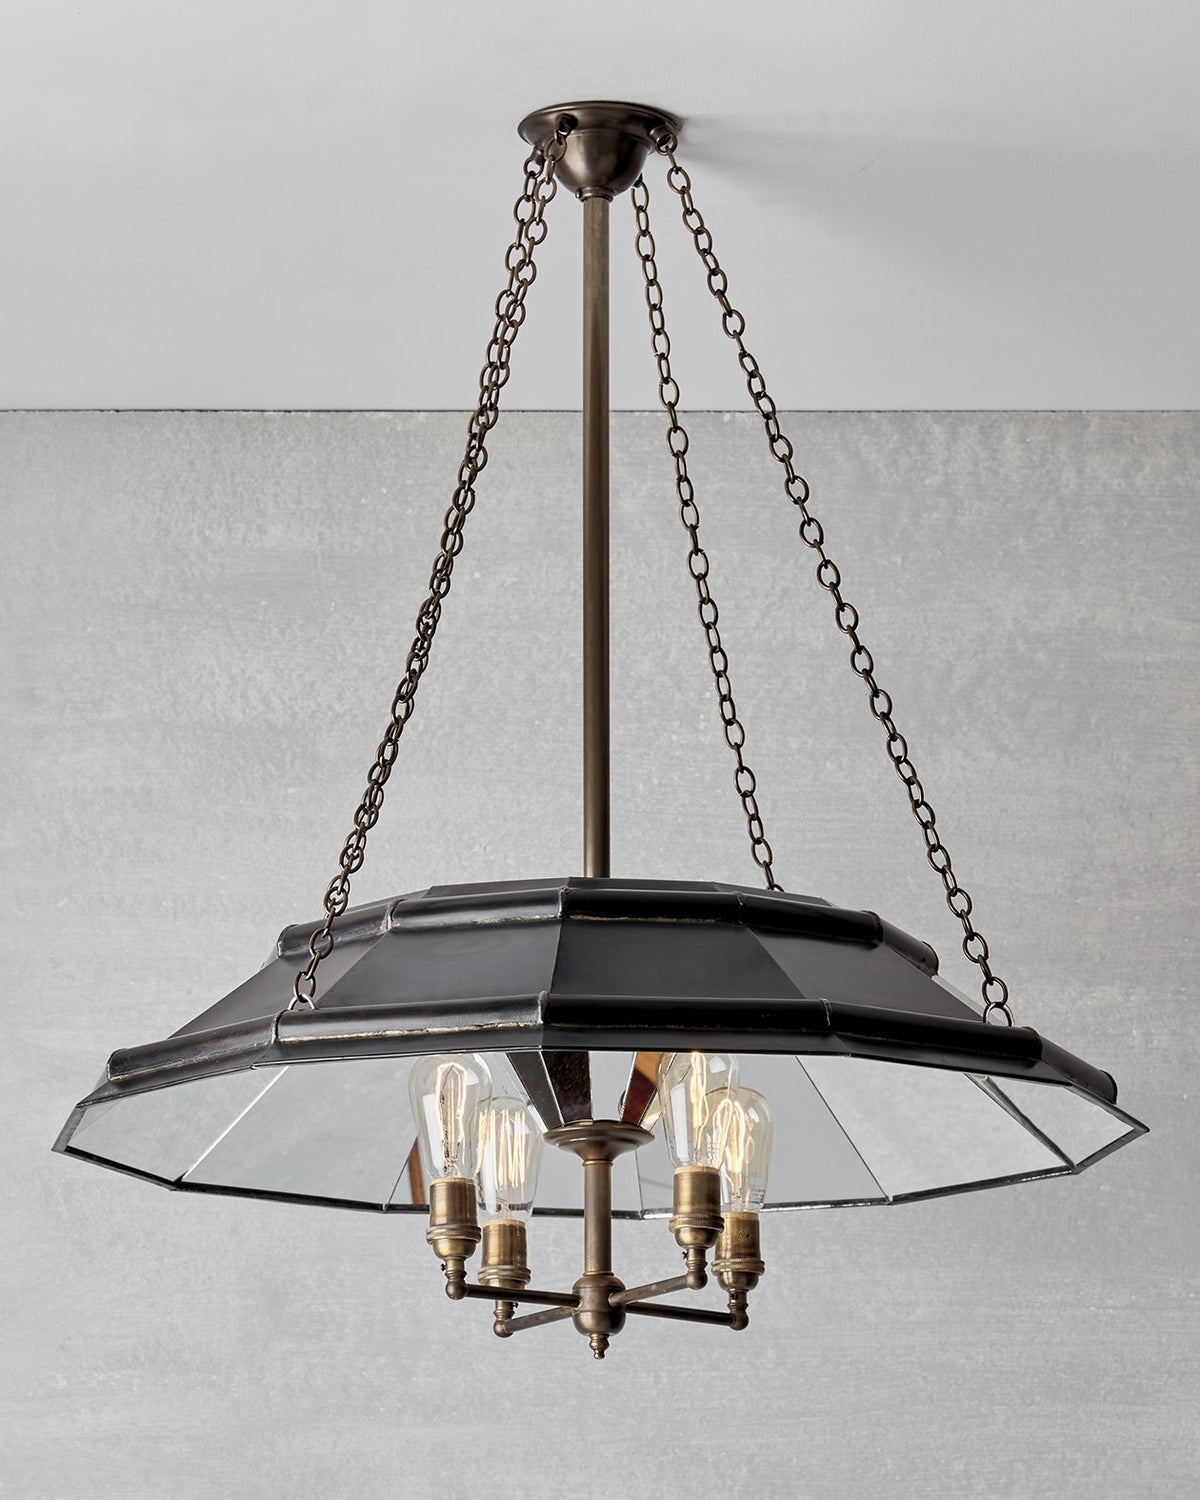 Victorian style metal chandelier with mirrored interior and edison bulbs